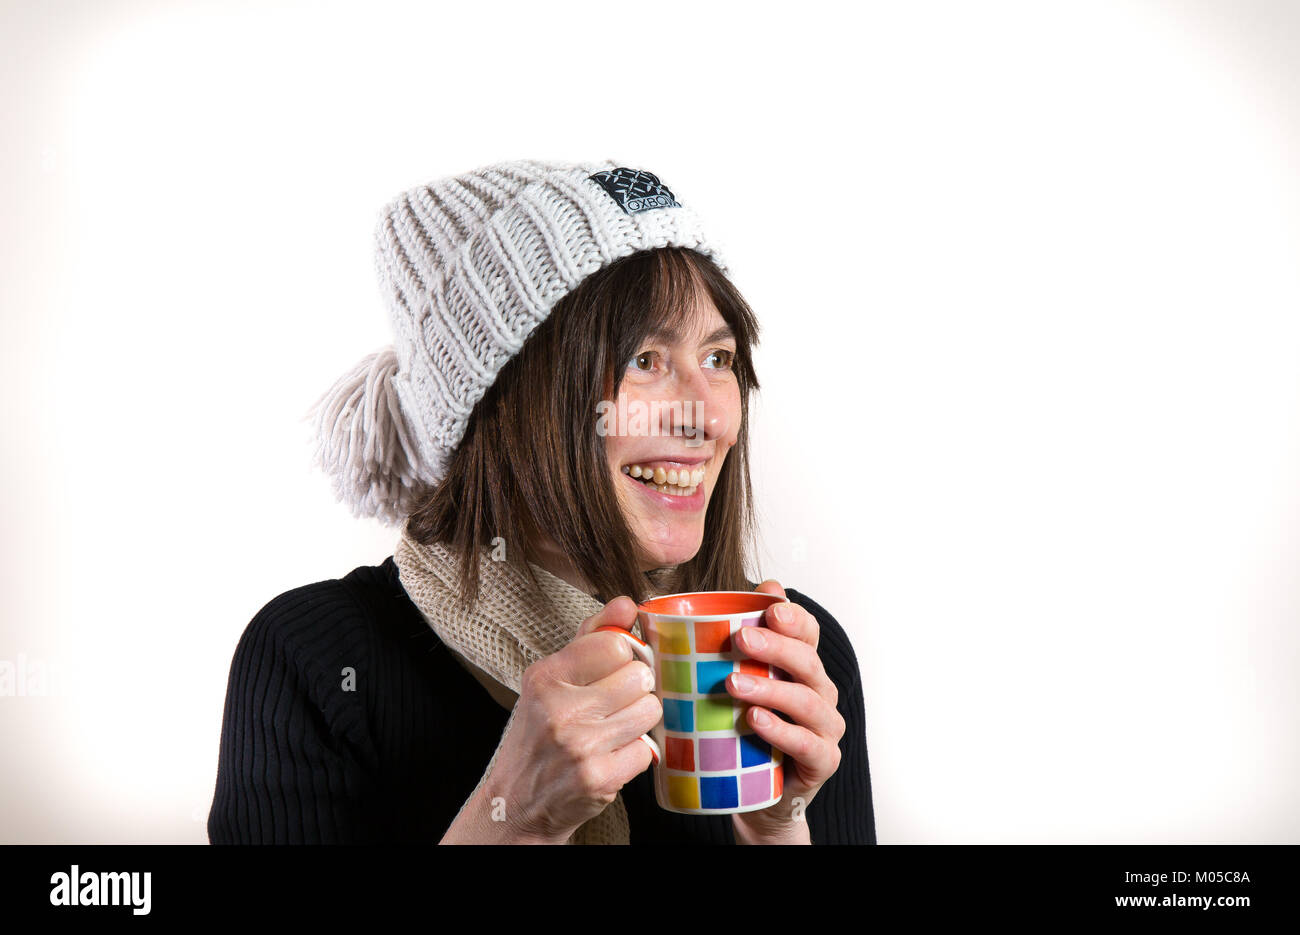 Inside portrait of happy female (side-on view) in woolly bobble ski hat, holding colourful mug of hot tea or coffee. Nice big natural smile. Stock Photo